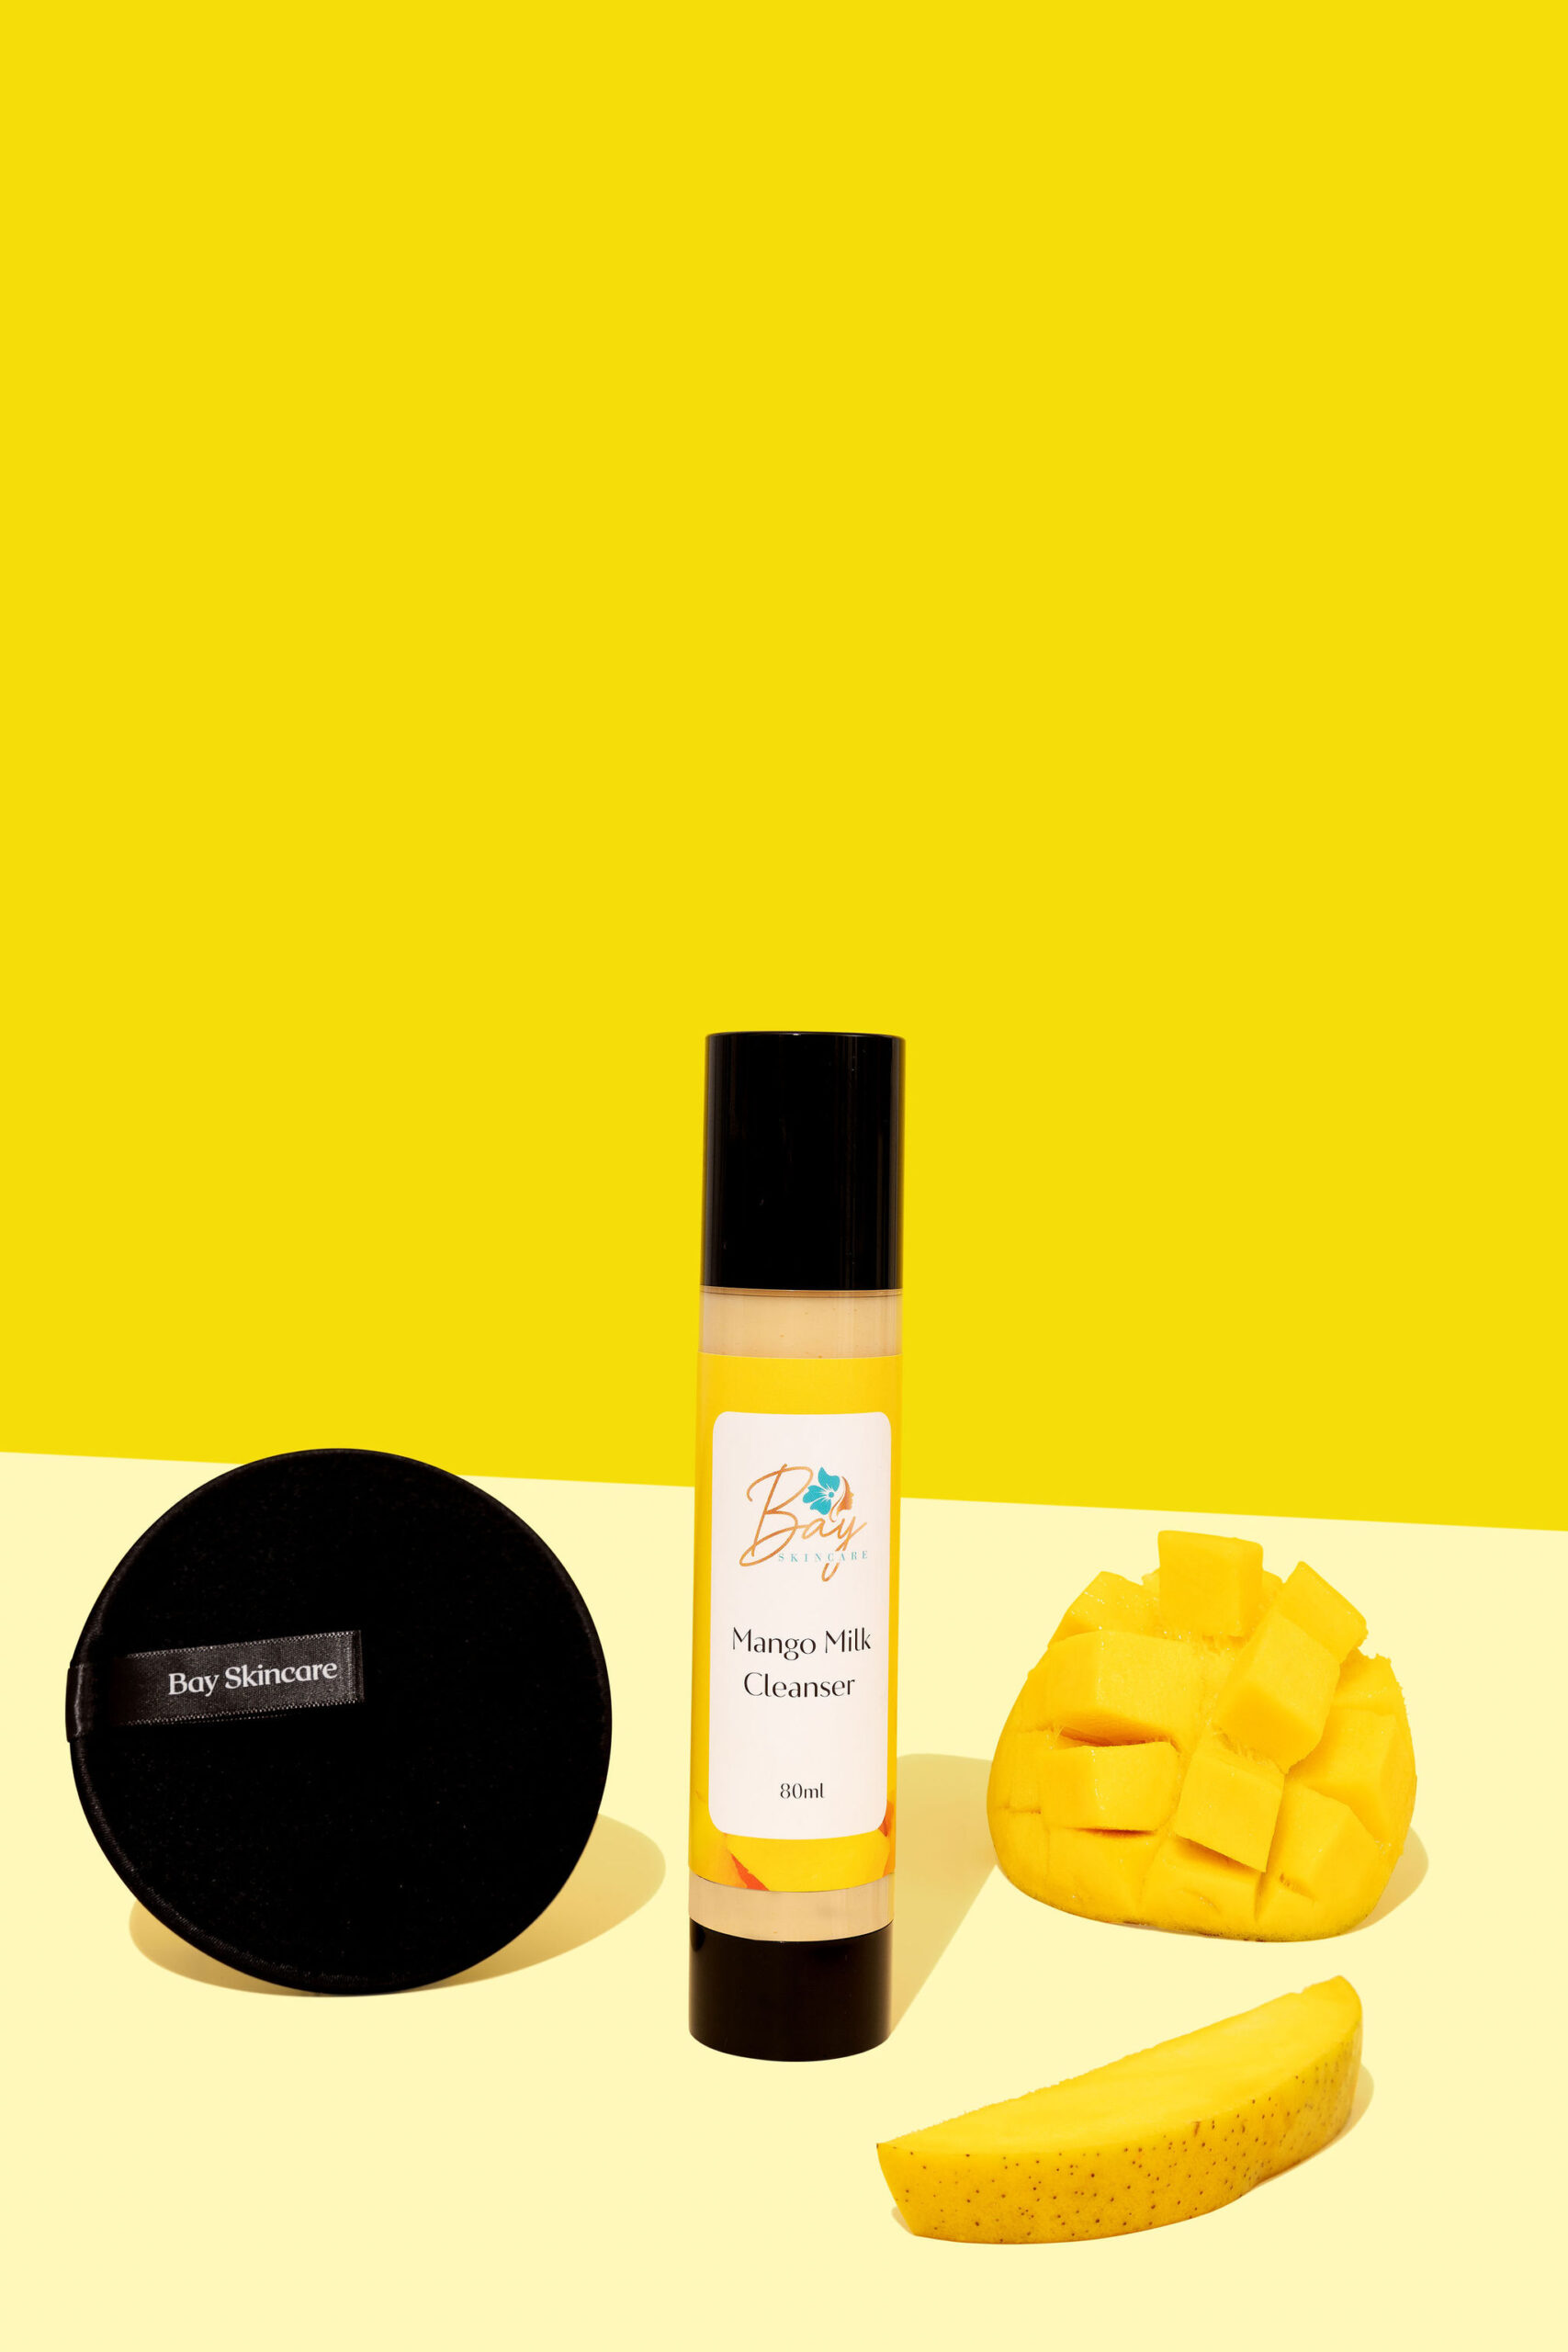 Fruity and Colourful Skincare Product Photography. Shot and Styled by Colourpop Studio 